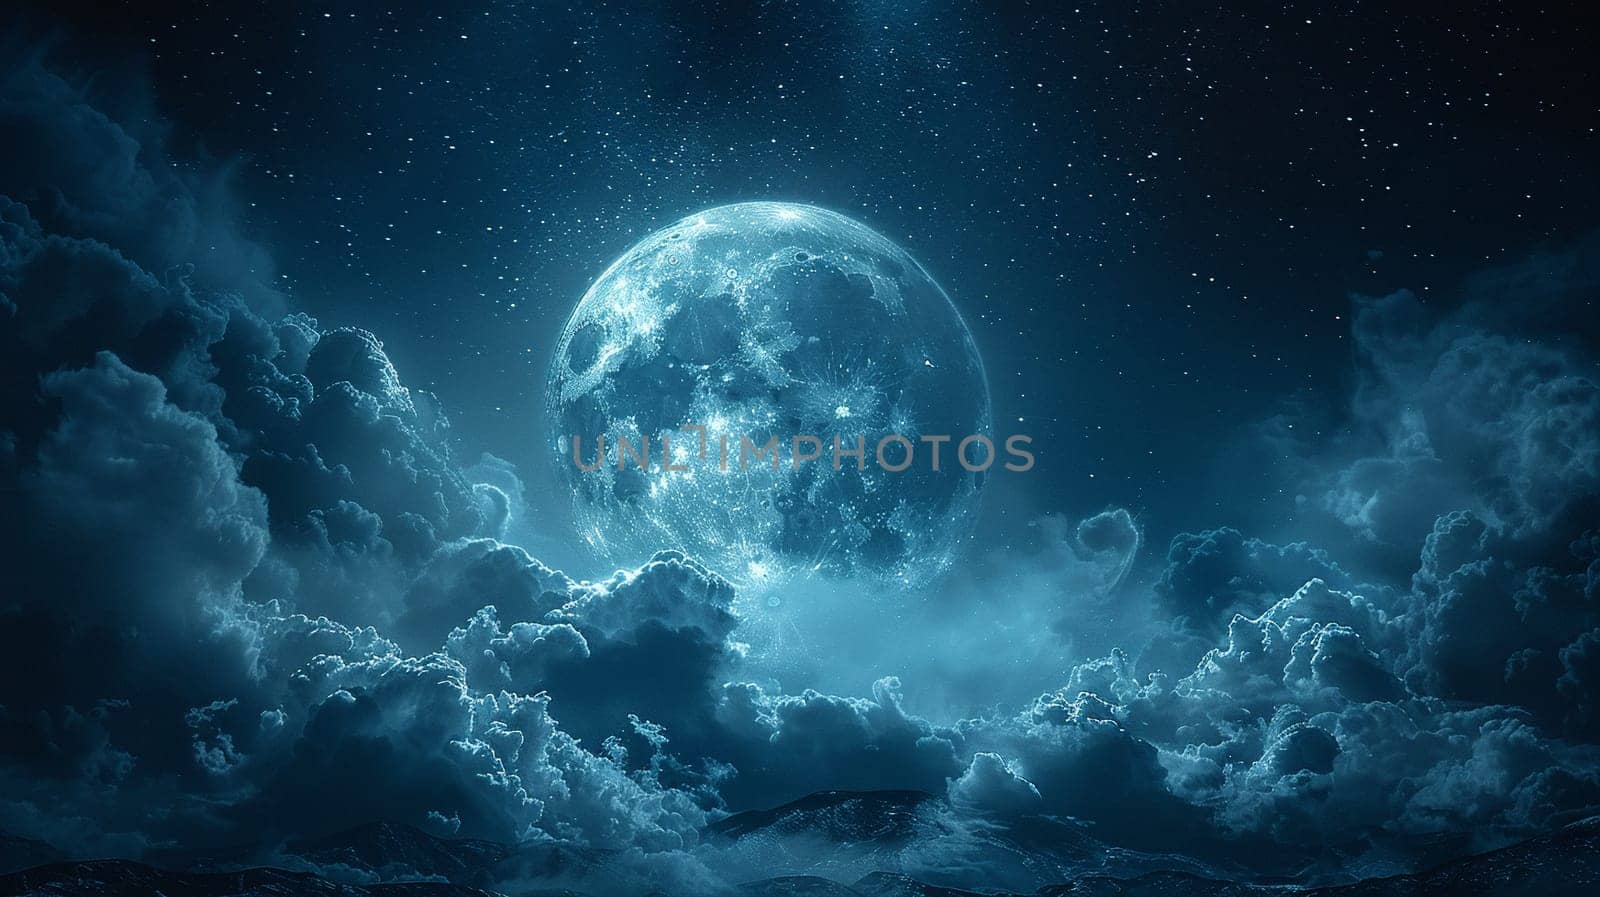 Moonlit clouds in a night sky by Benzoix